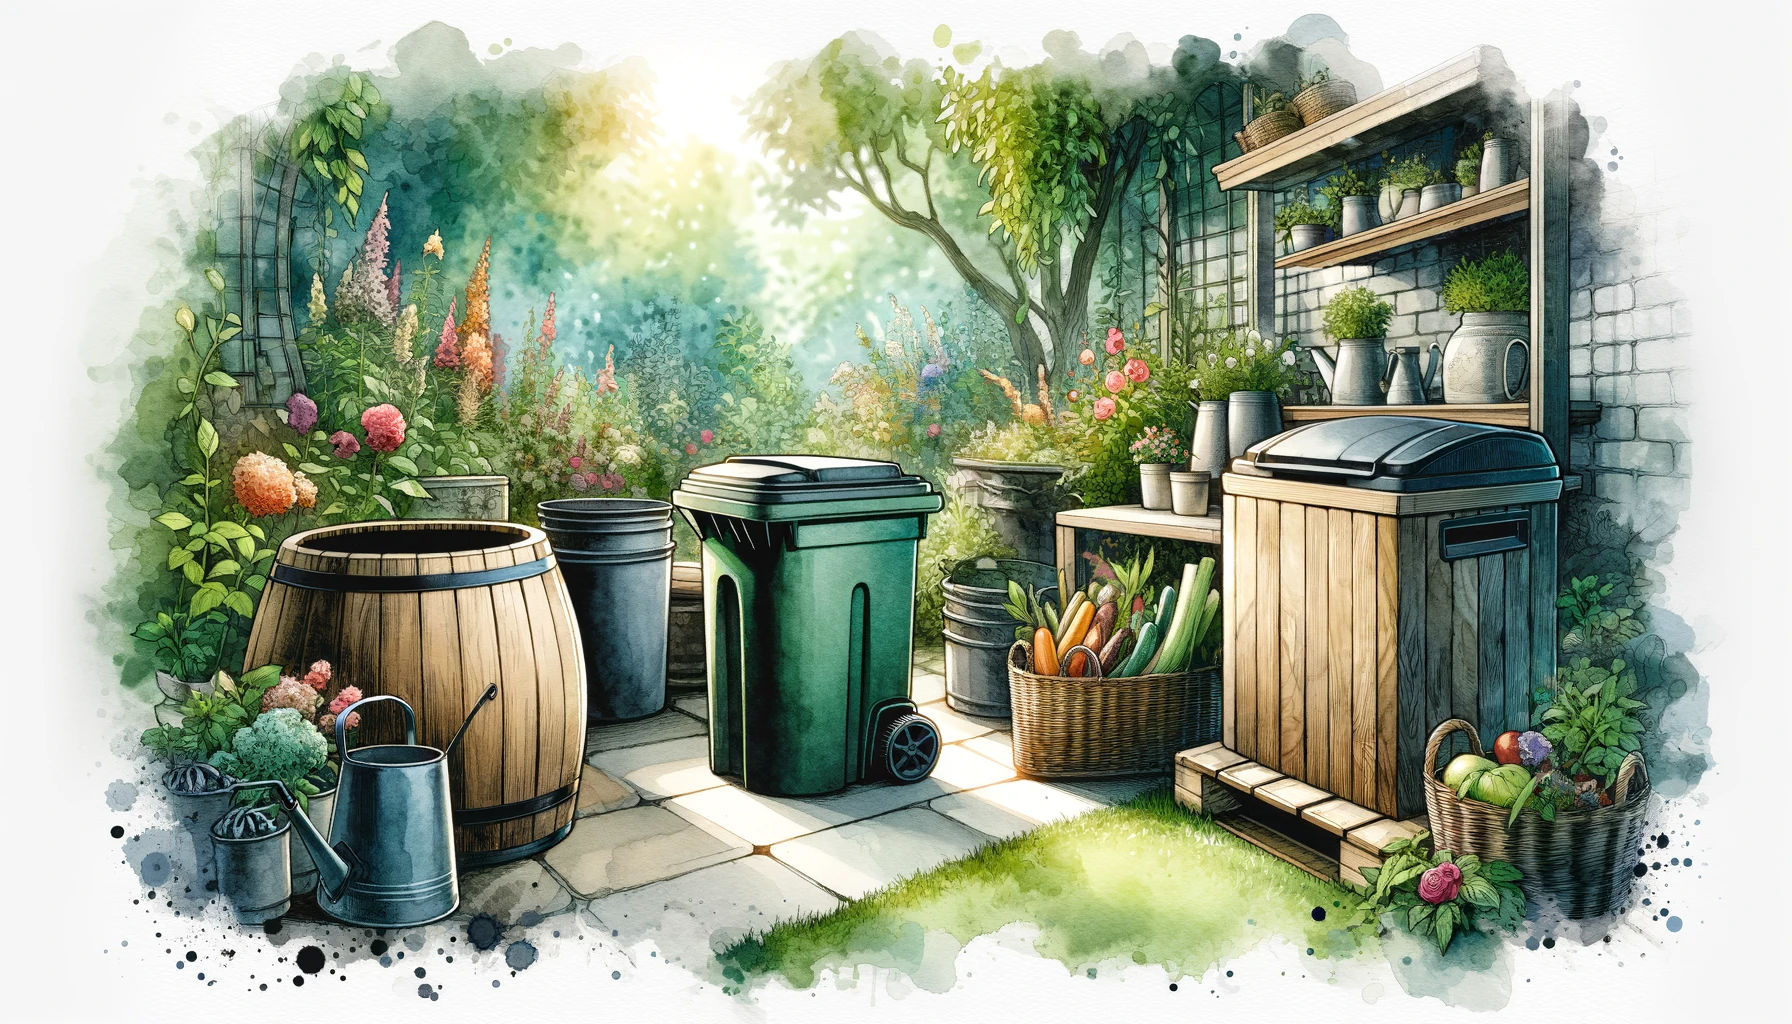 5 Things to Consider When Purchasing a Compost Bin